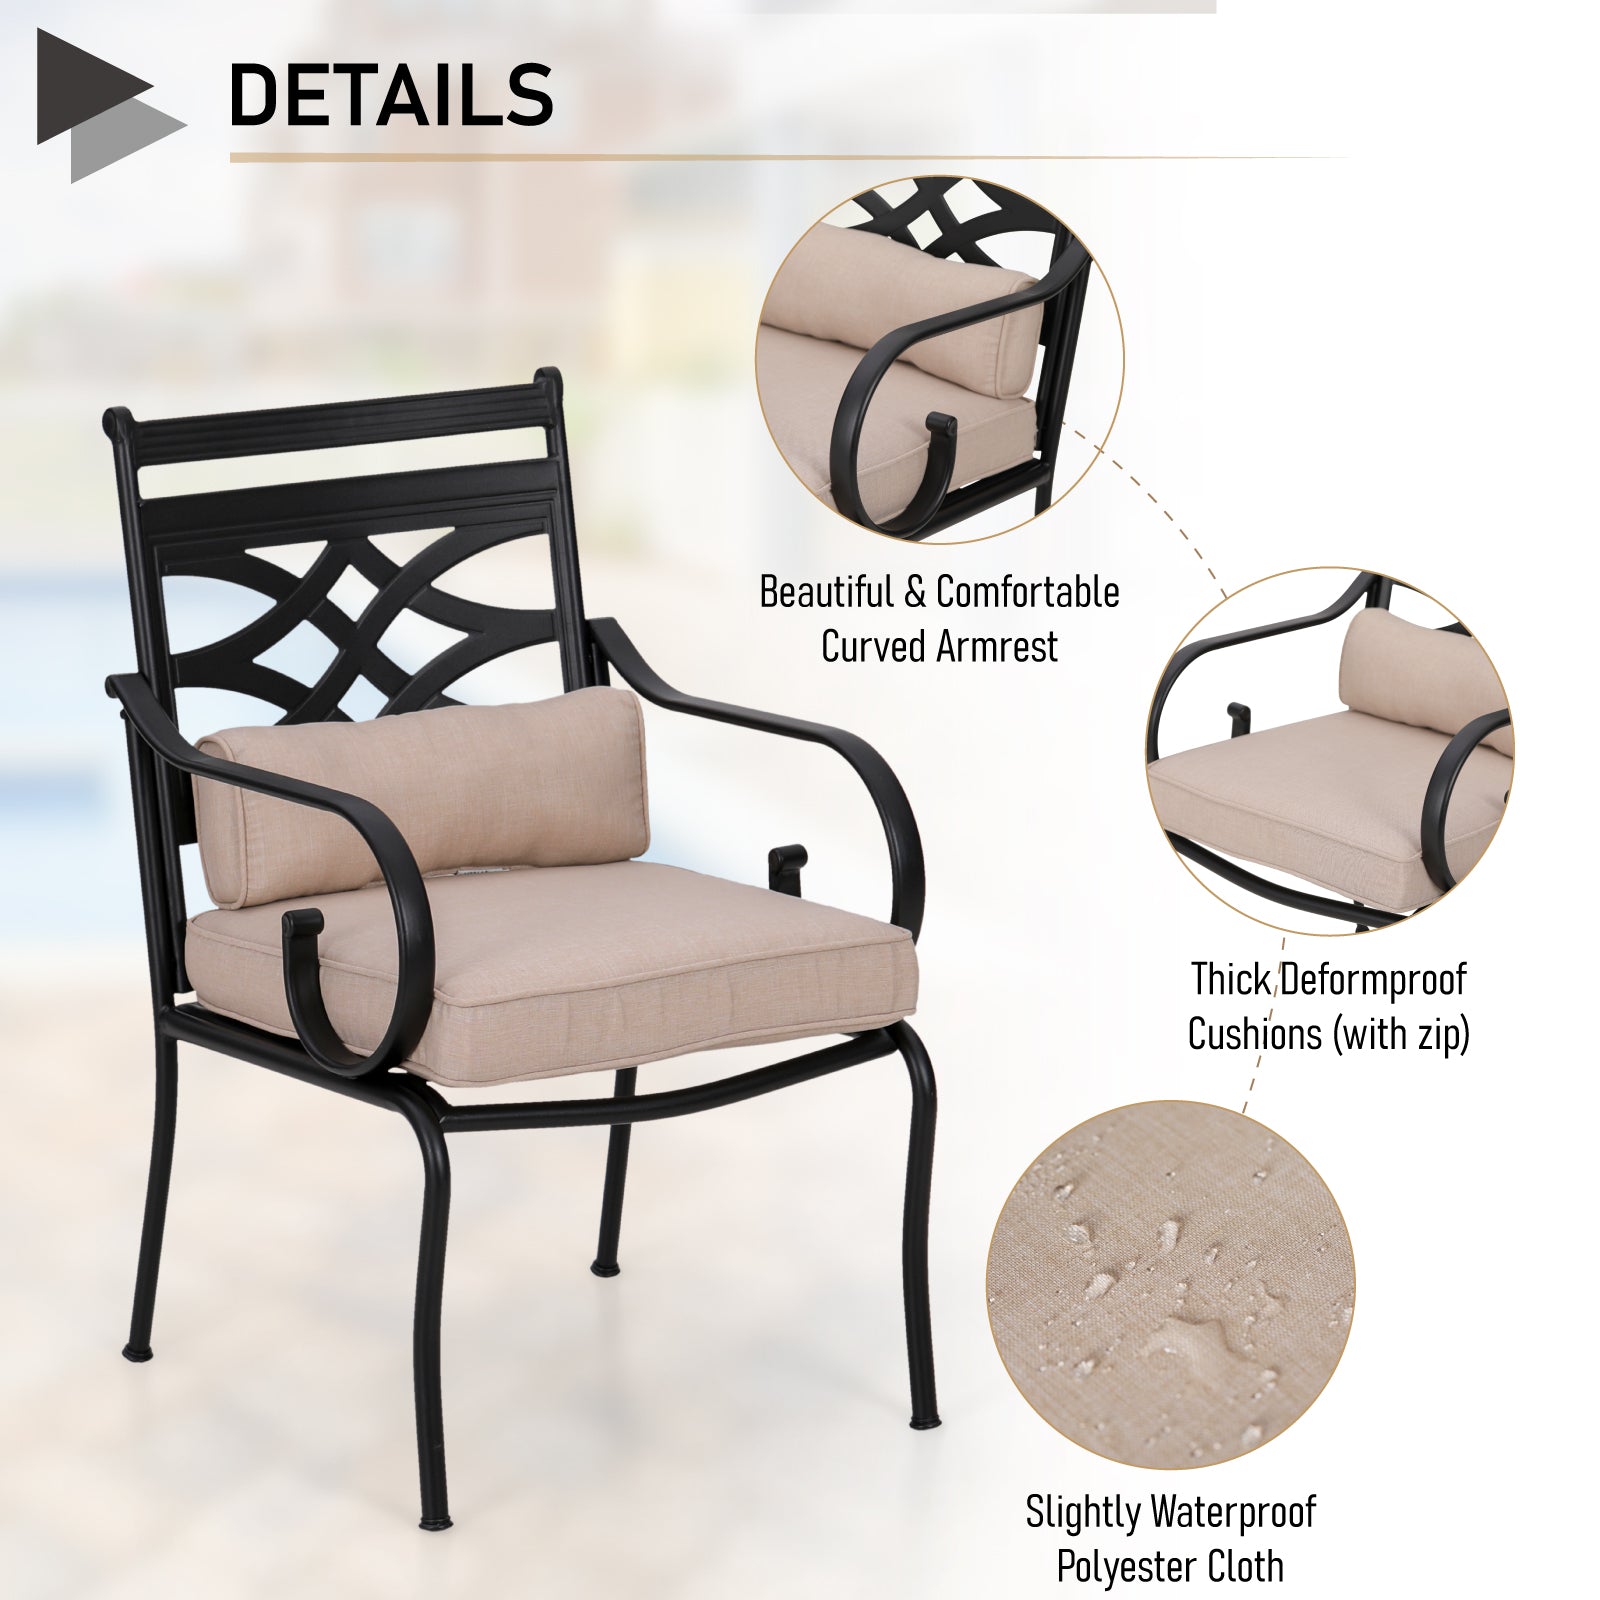 MFSTUDIO 7-Piece Outdoor Dining Set Steel Rectangle Table & Elegant Cast Iron Pattern Dining Chairs